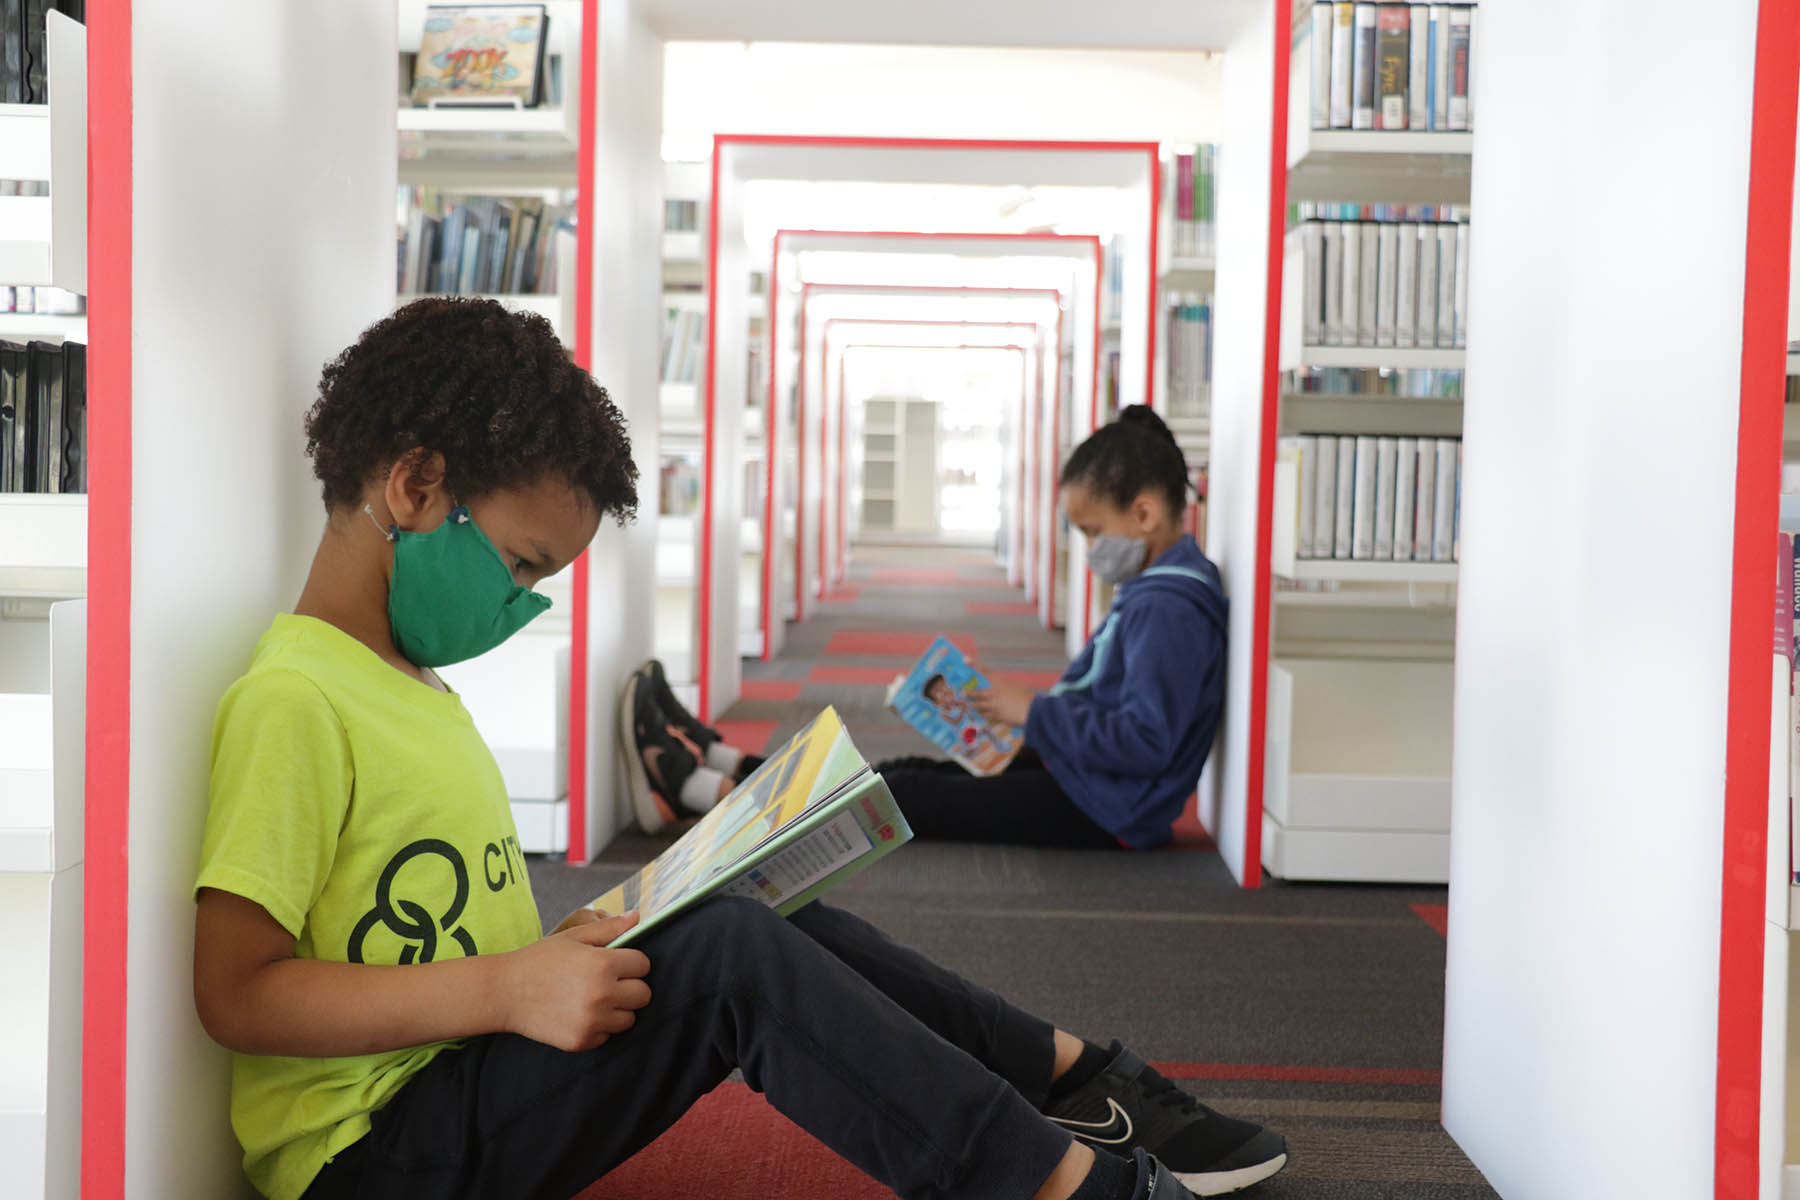 Young boy and young girl reading books while sitting in the library among the shelves